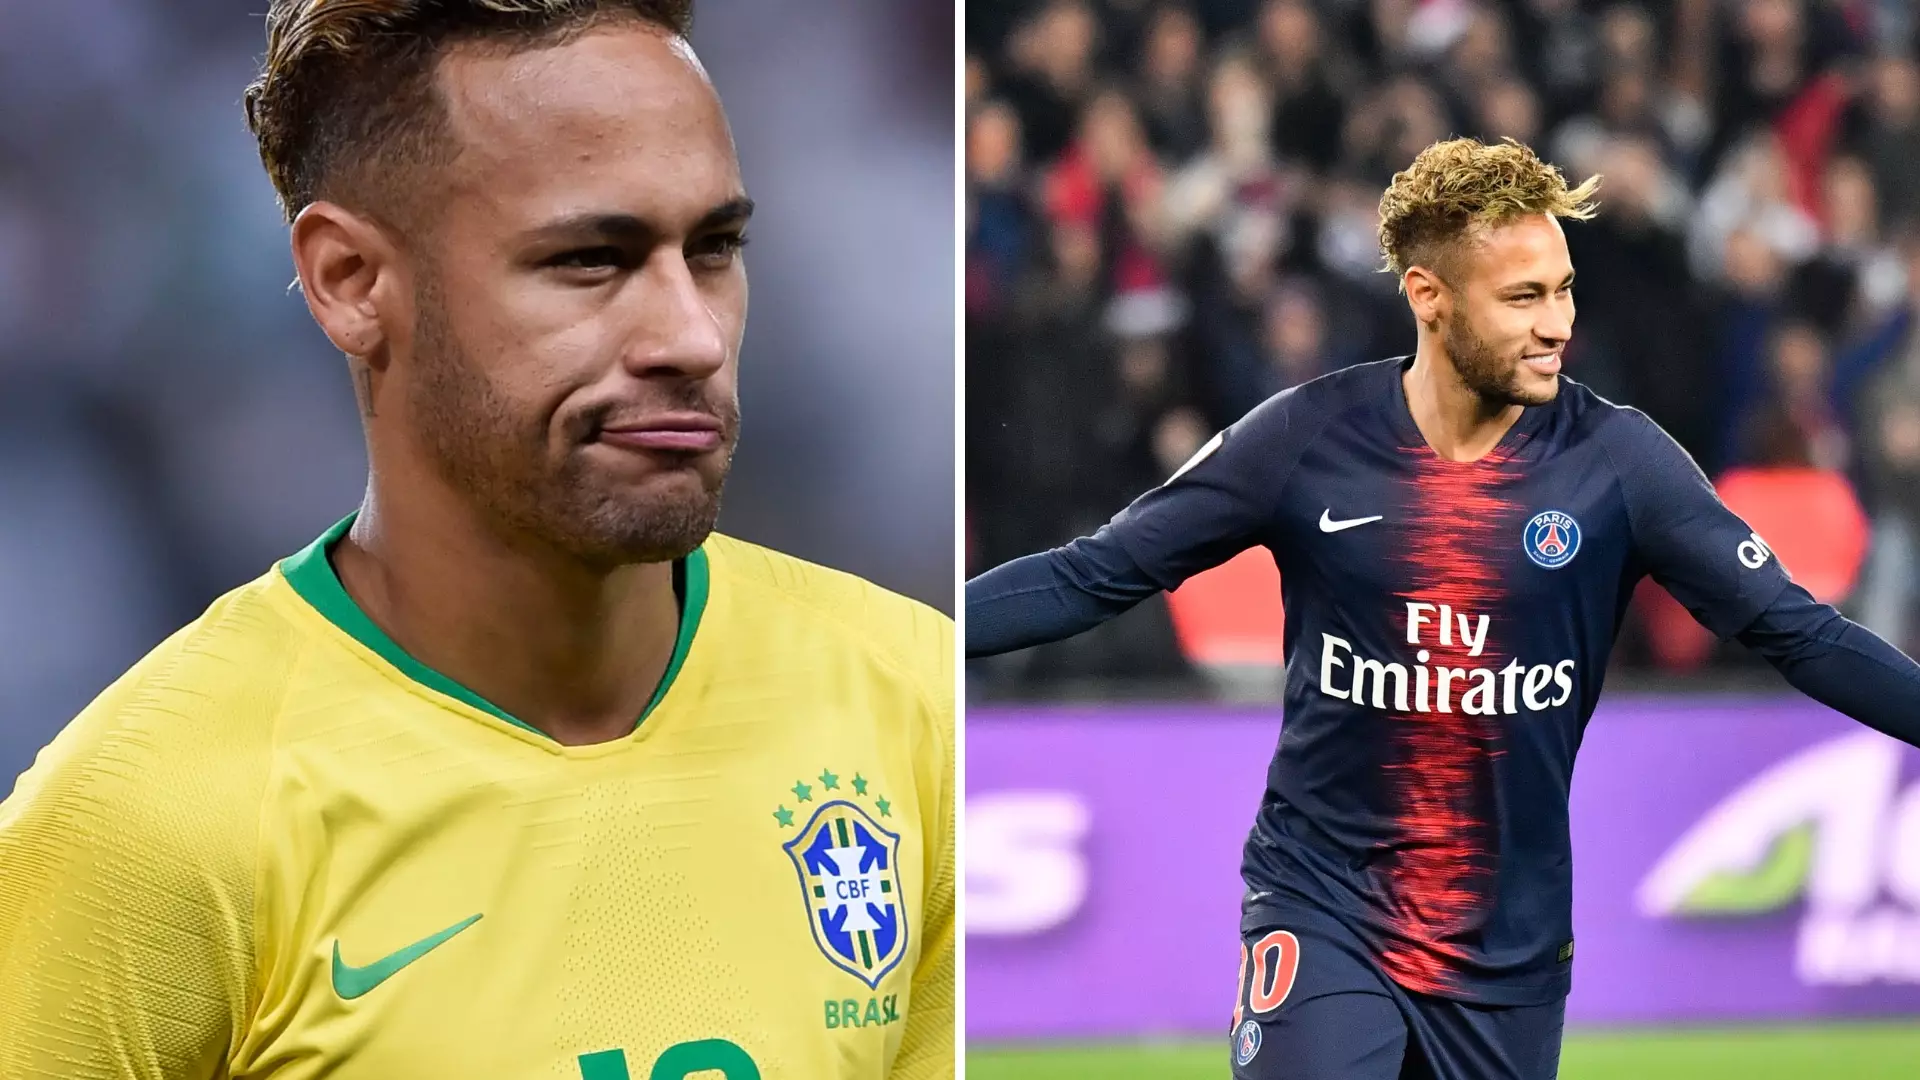 Neymar Reaches An Agreement With PSG President To Leave The Club